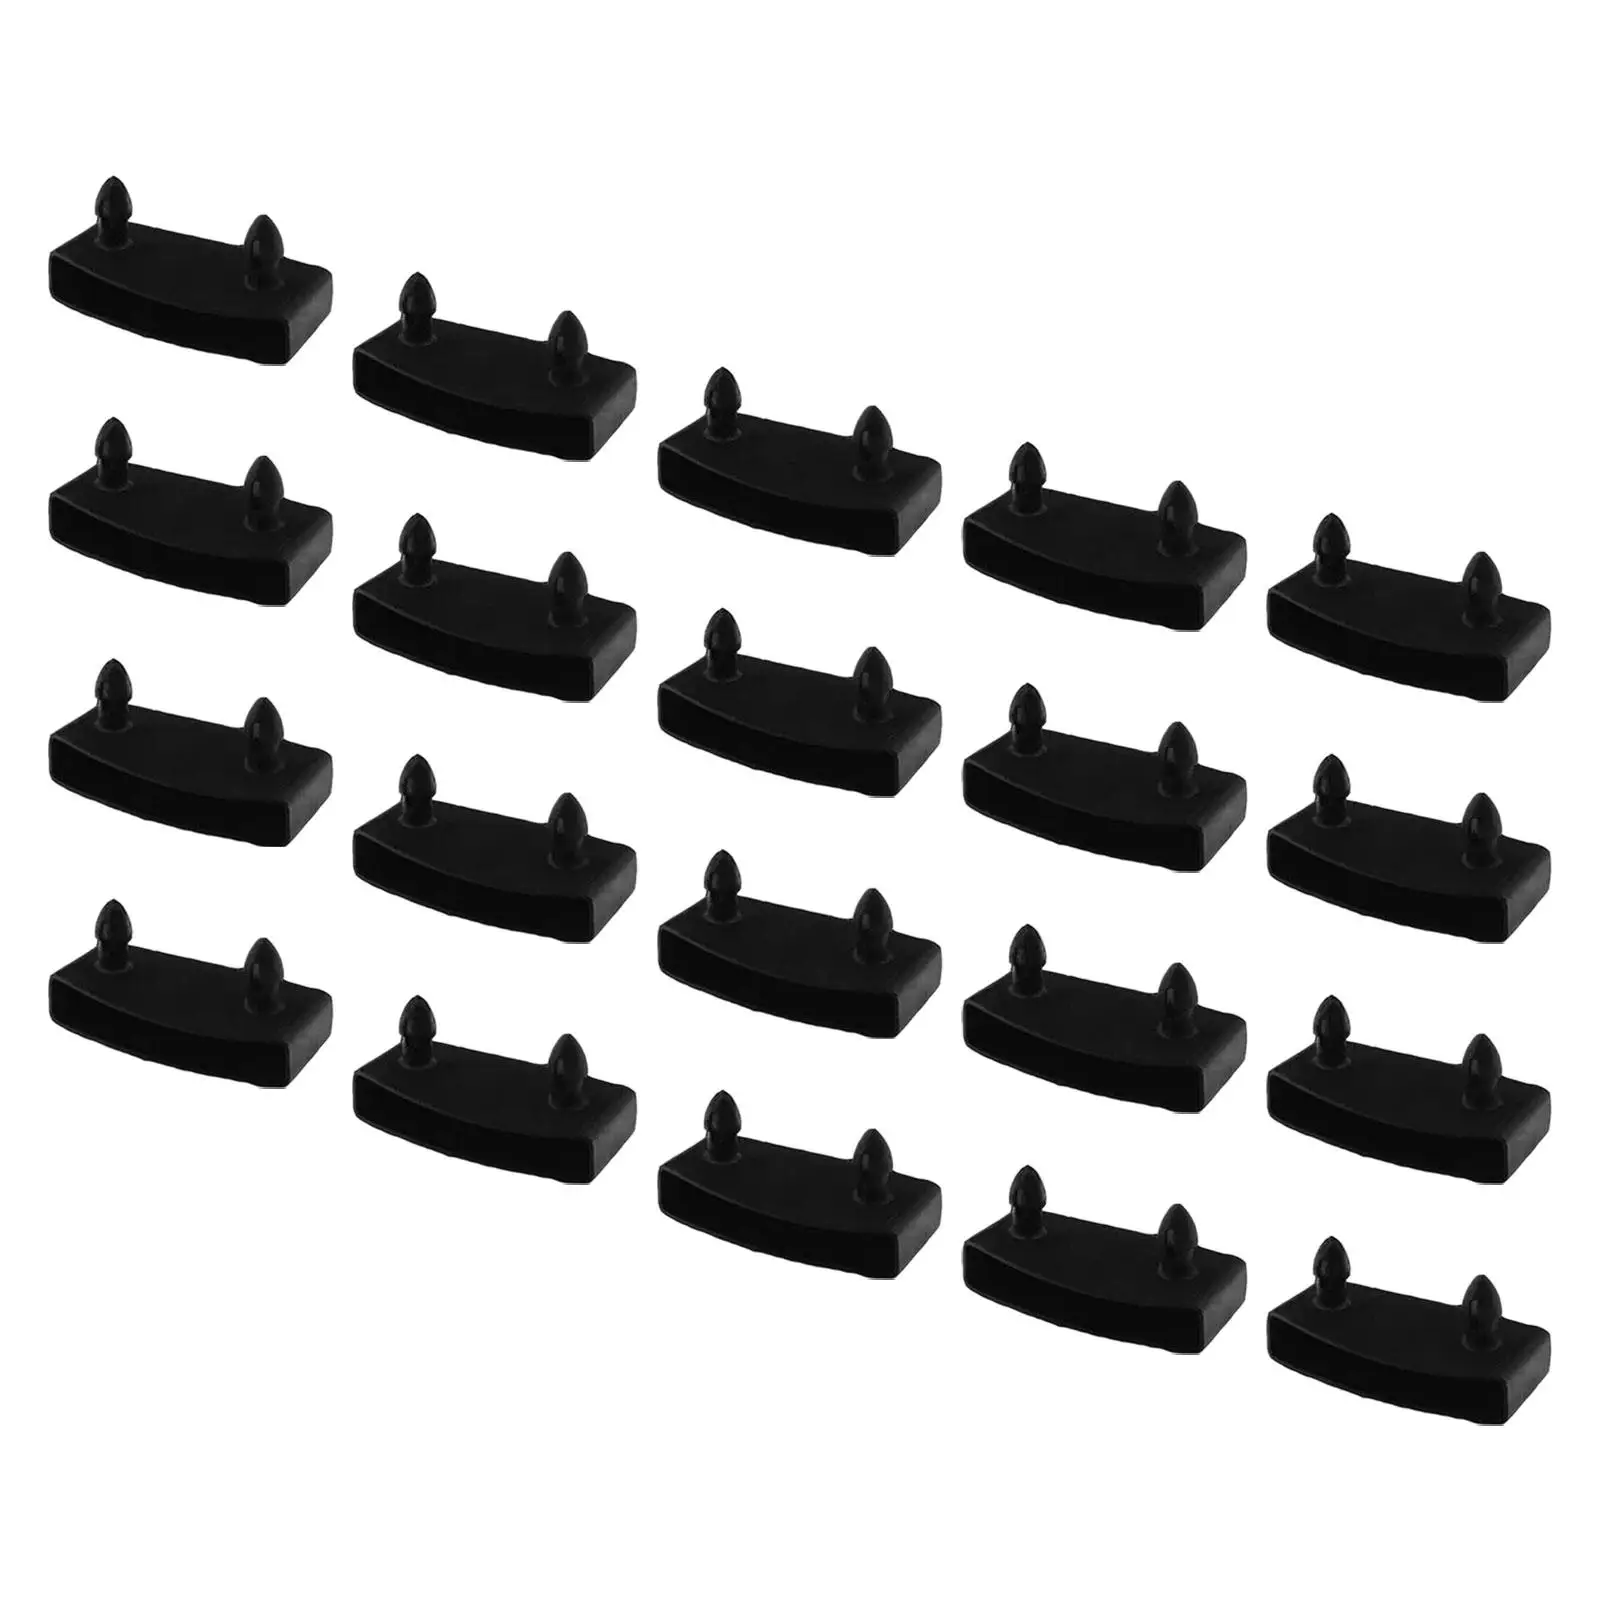 20Pcs End Caps for Bed Securing Multipurpose Bed Slat Holder Sides Ends Fixings for Wooden Bed Bunk Bed Metal Bed Leather Bed